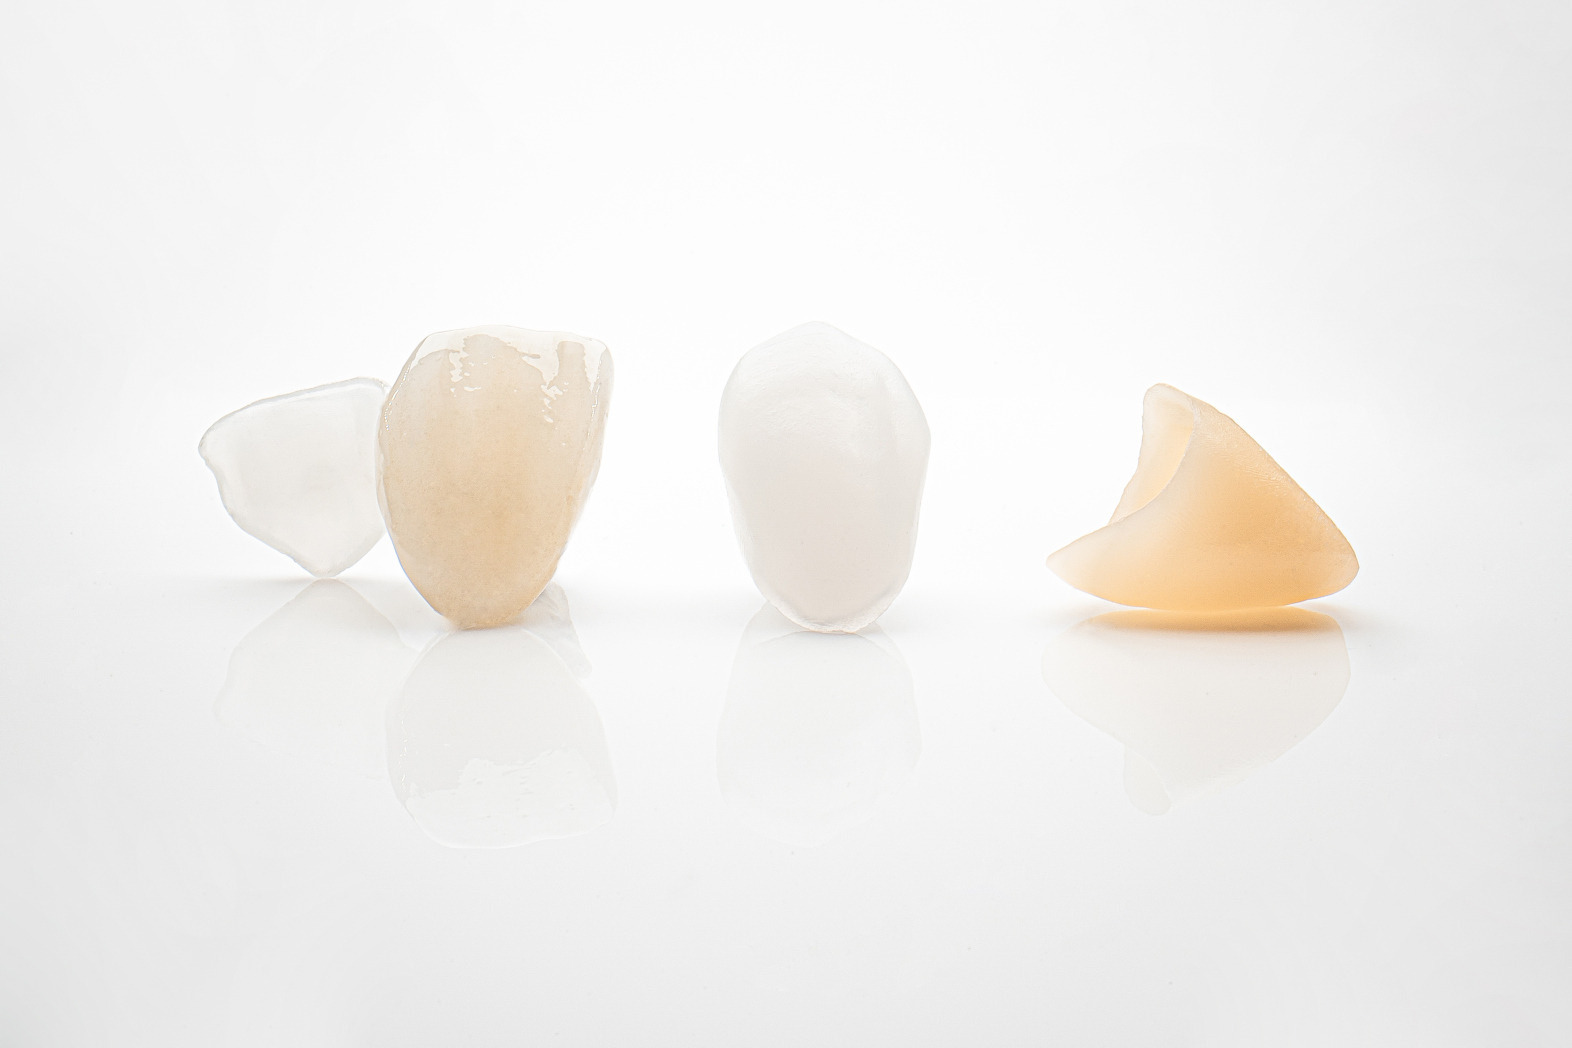 Did you know that 3D printing can produce highly accurate dental restorations from lithium disilicate?